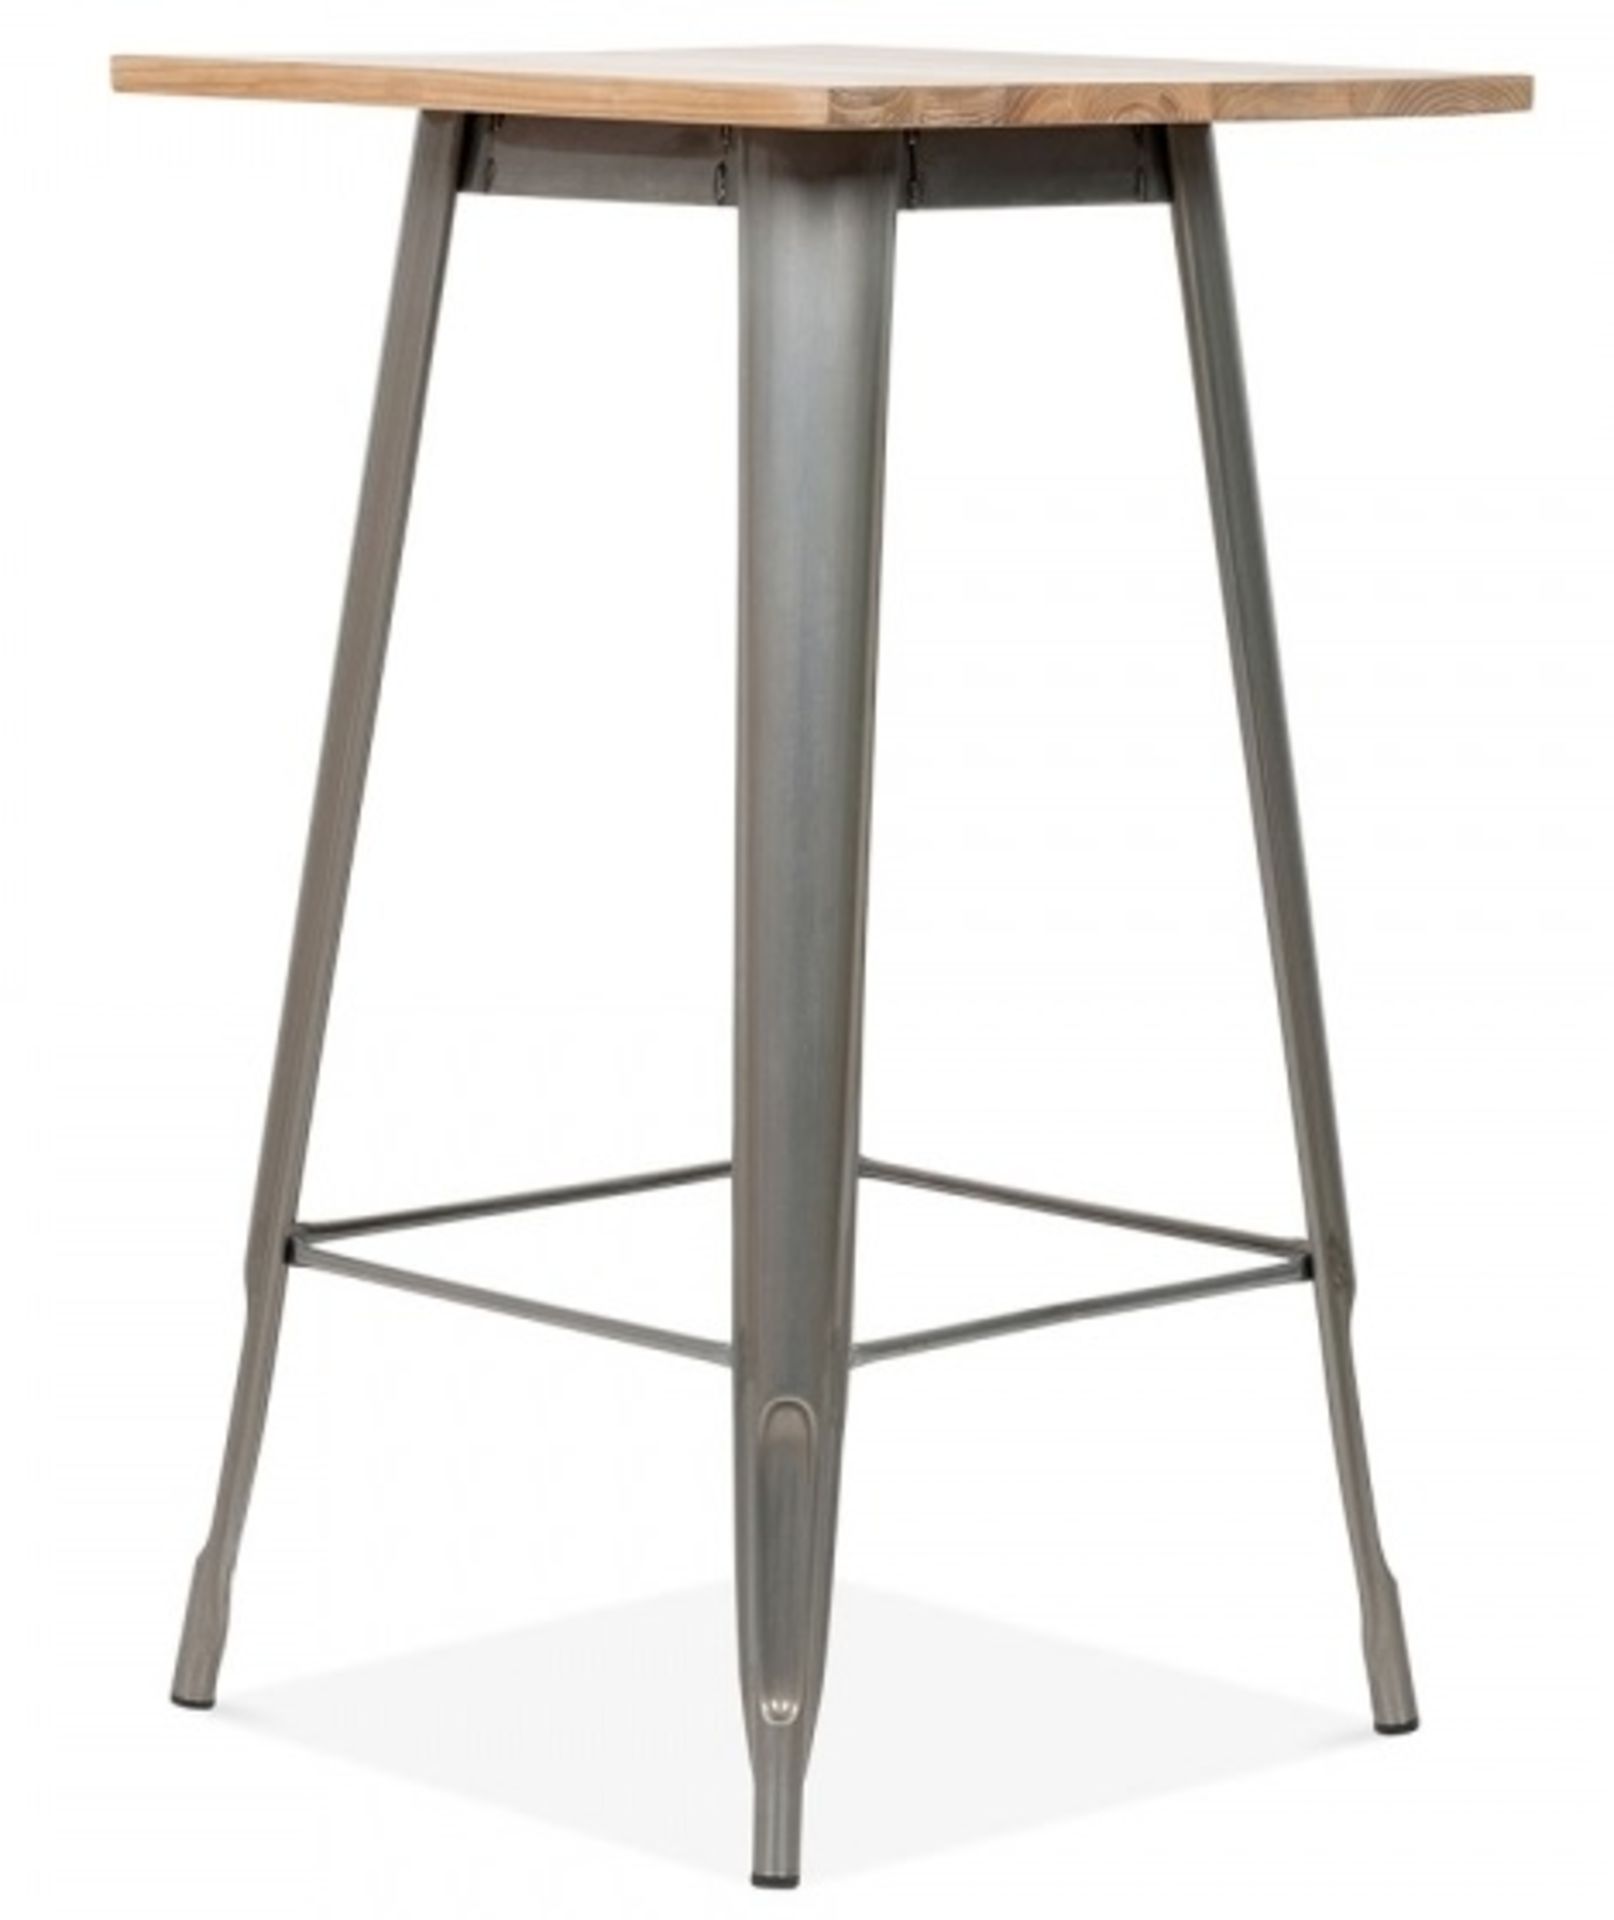 1 x Xavier Pauchard / Tolix Inspired Industrial Metal Bar Table - COPPER With Natural Wood Top - Image 5 of 5